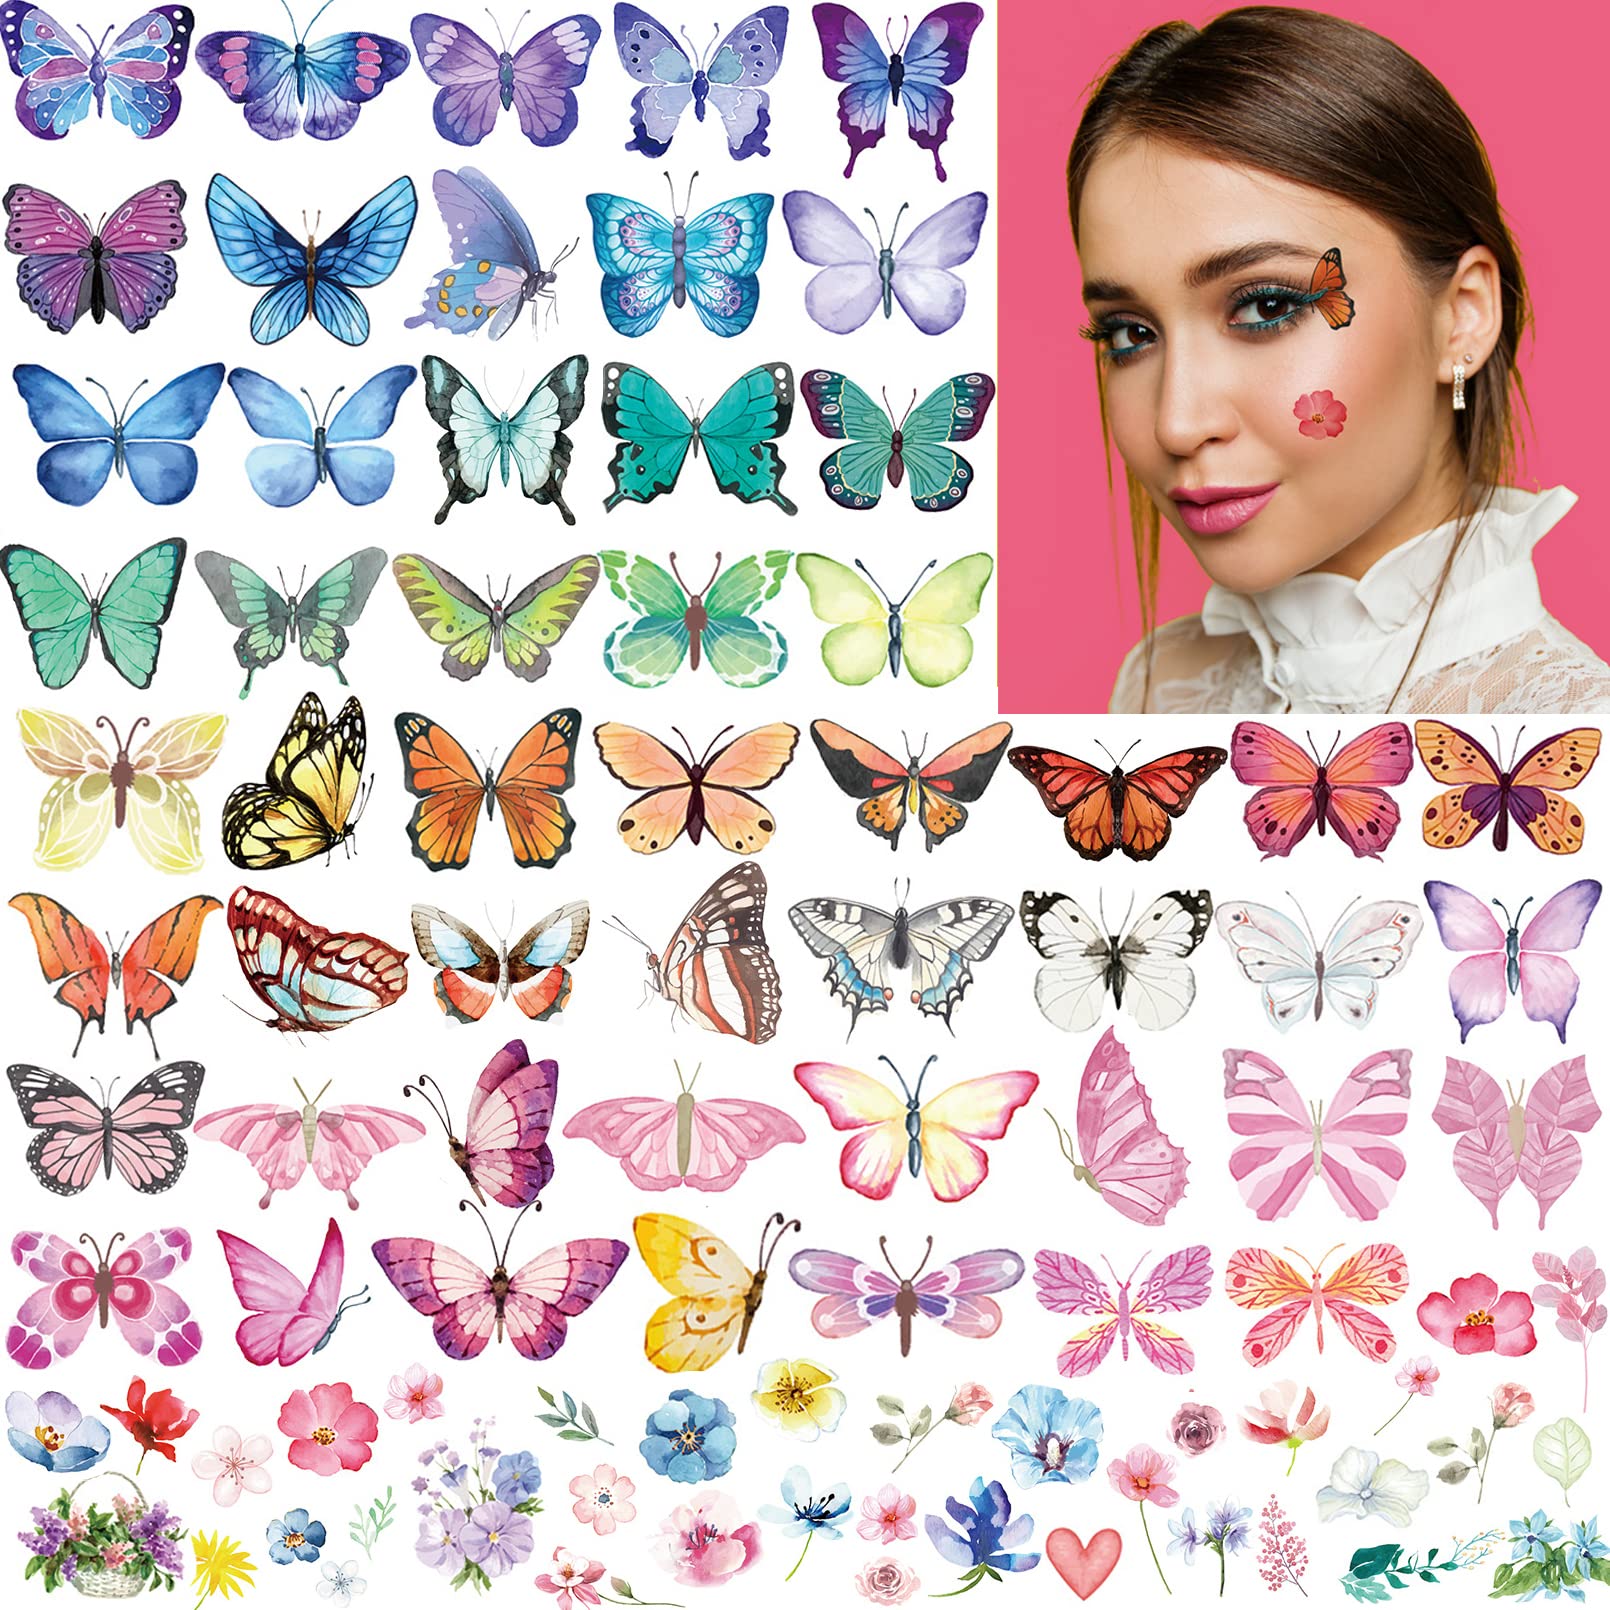 Coszeos 100Pcs Butterfly Temporary Tattoos for Kids Women Girls, Fake Colorful Butterflies Wings Flower Tattoo Stickers Art Waterproof for Face Body Arm Birthday Party Favors Makeup Supplies Gifts